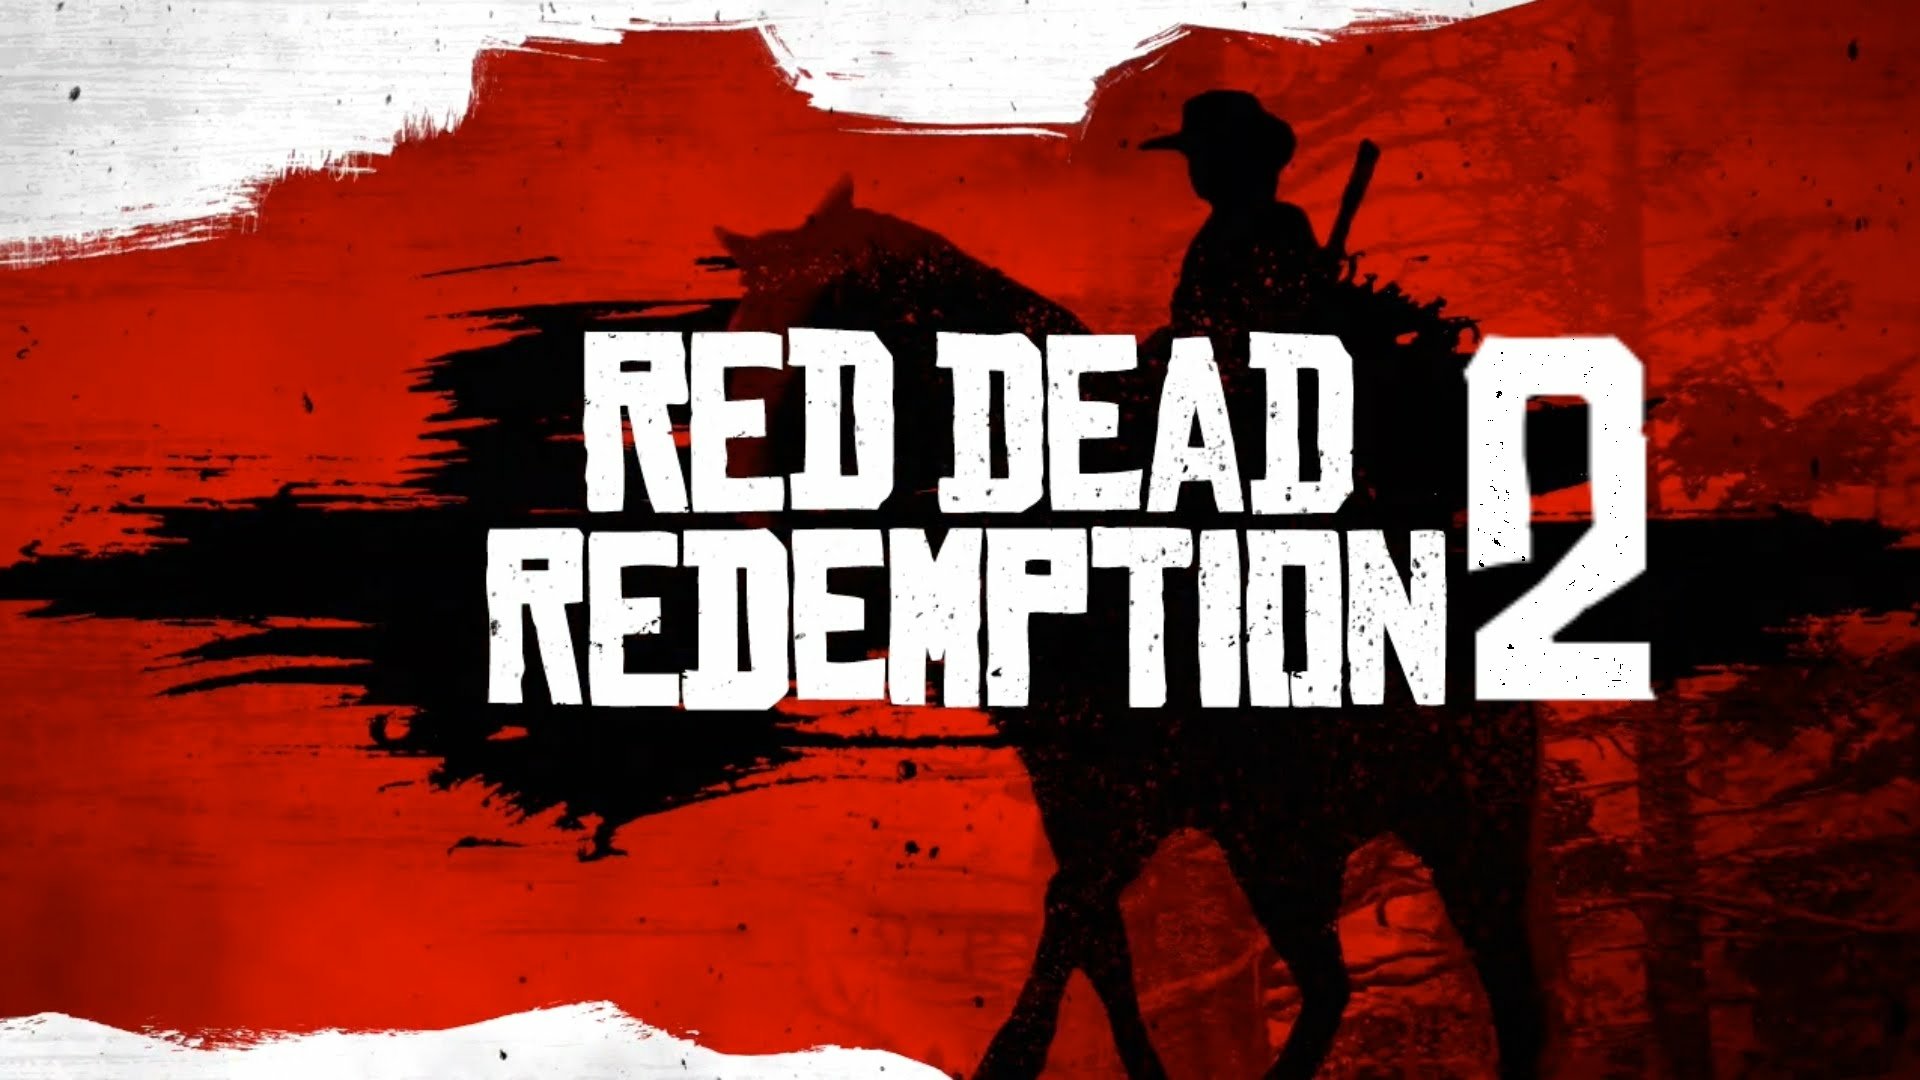 iphone xs red dead redemption 2 images